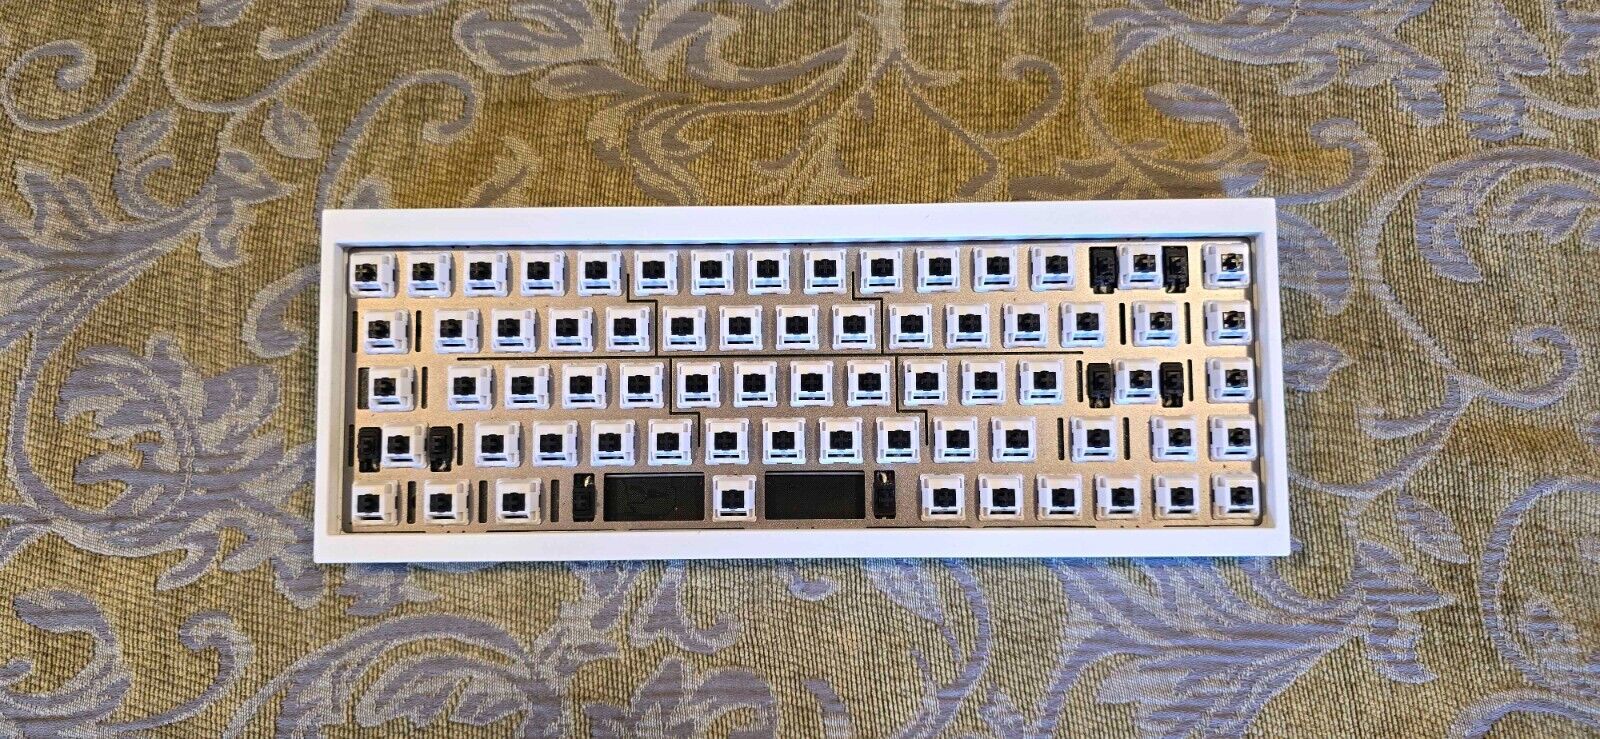 KBDFans TOFU65 with Lubed + Filmed Cookies and Creme switches and Tape Mod